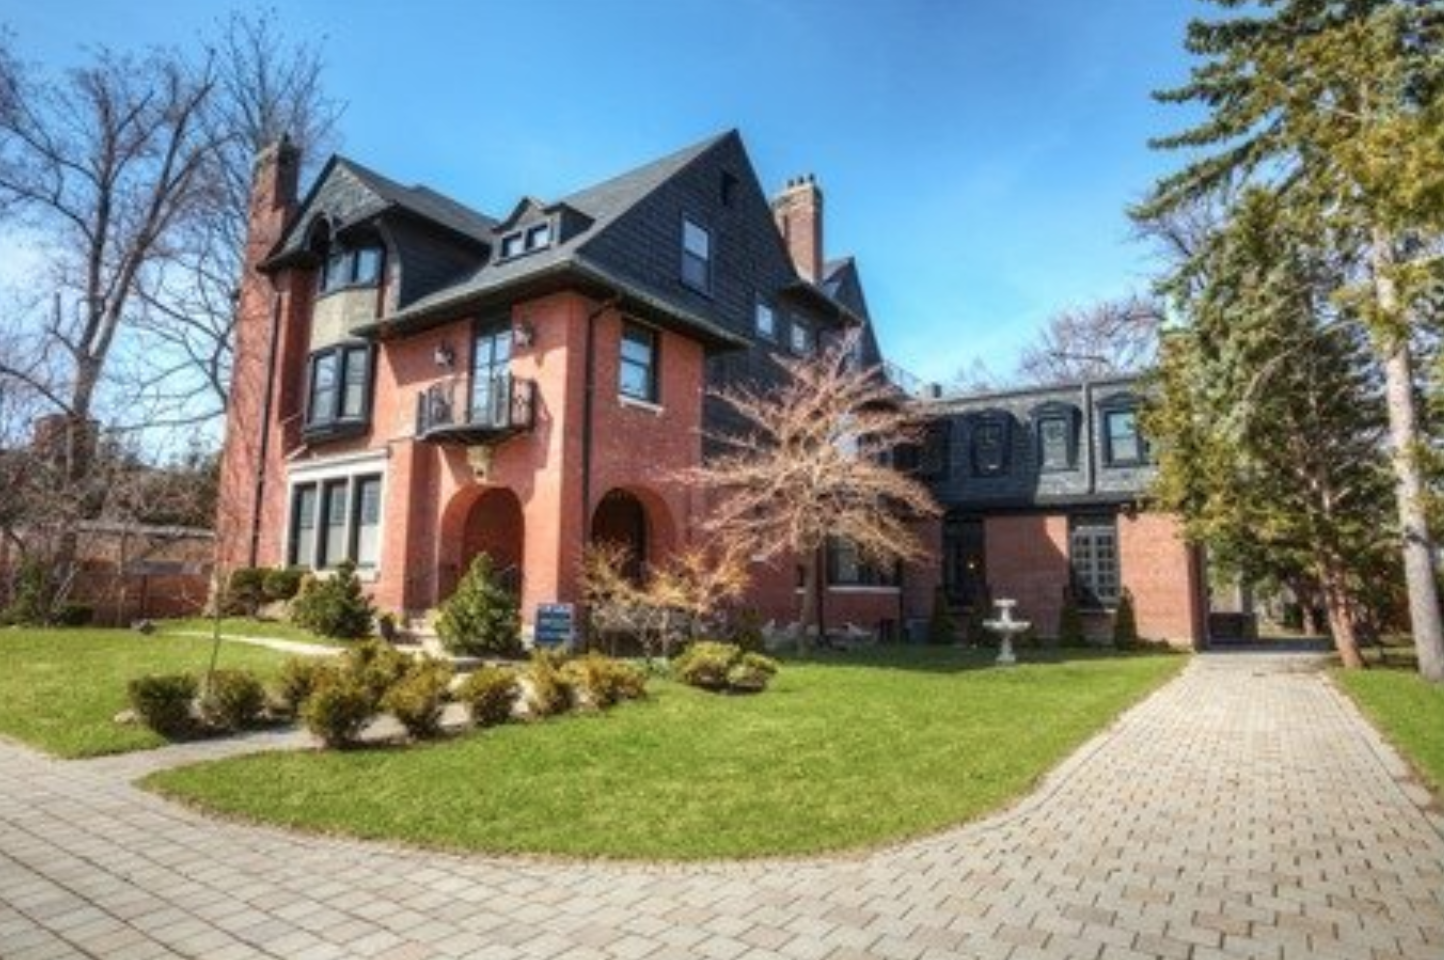 AND IT WENT FOR - 166 Crescent Road - ROSEDALE, TORONTO (2 Comments) — the  MASH